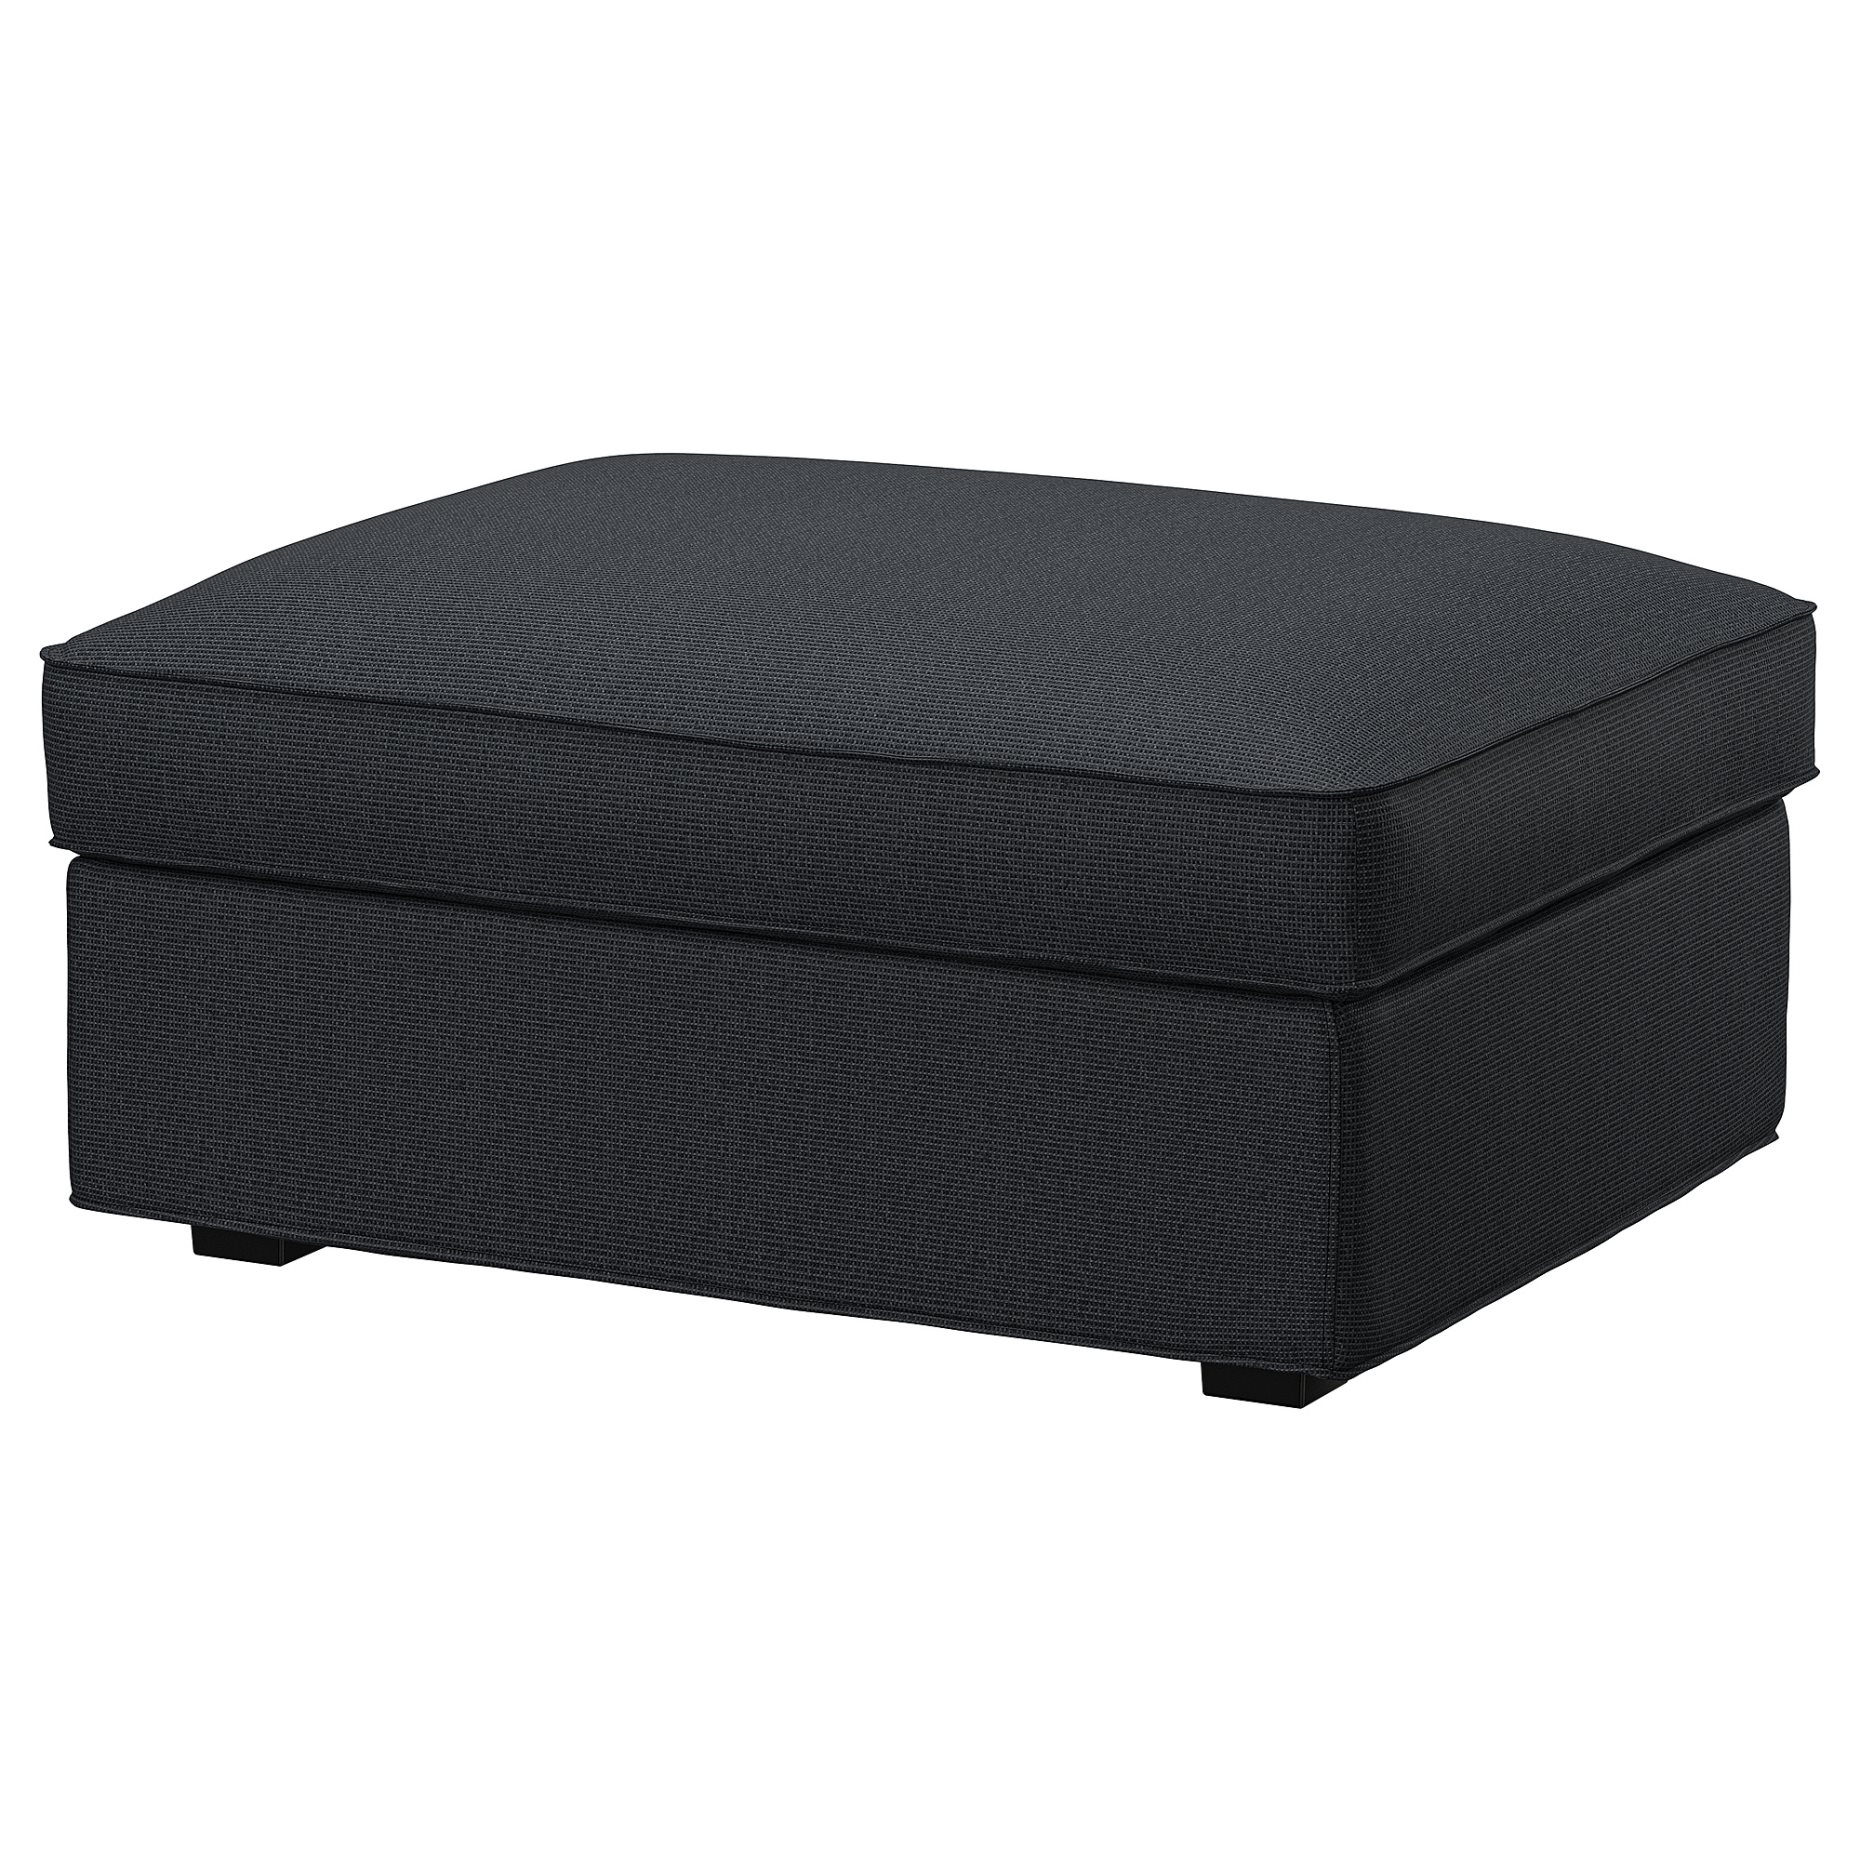 KIVIK, cover for footstool with storage, 005.275.11